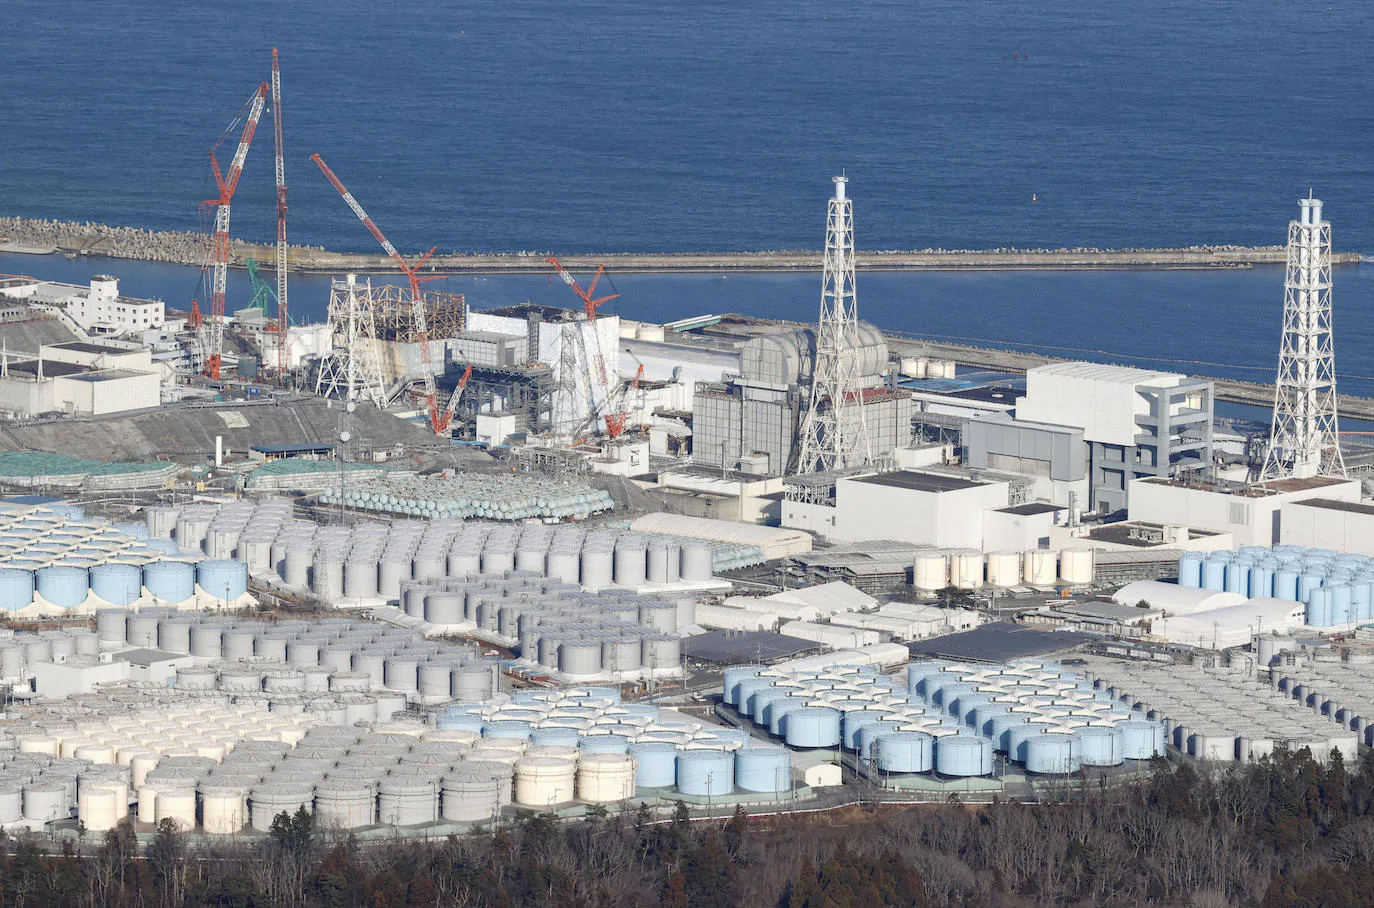 The Spanish technology that could 'clean' the radioactive water from Fukushima